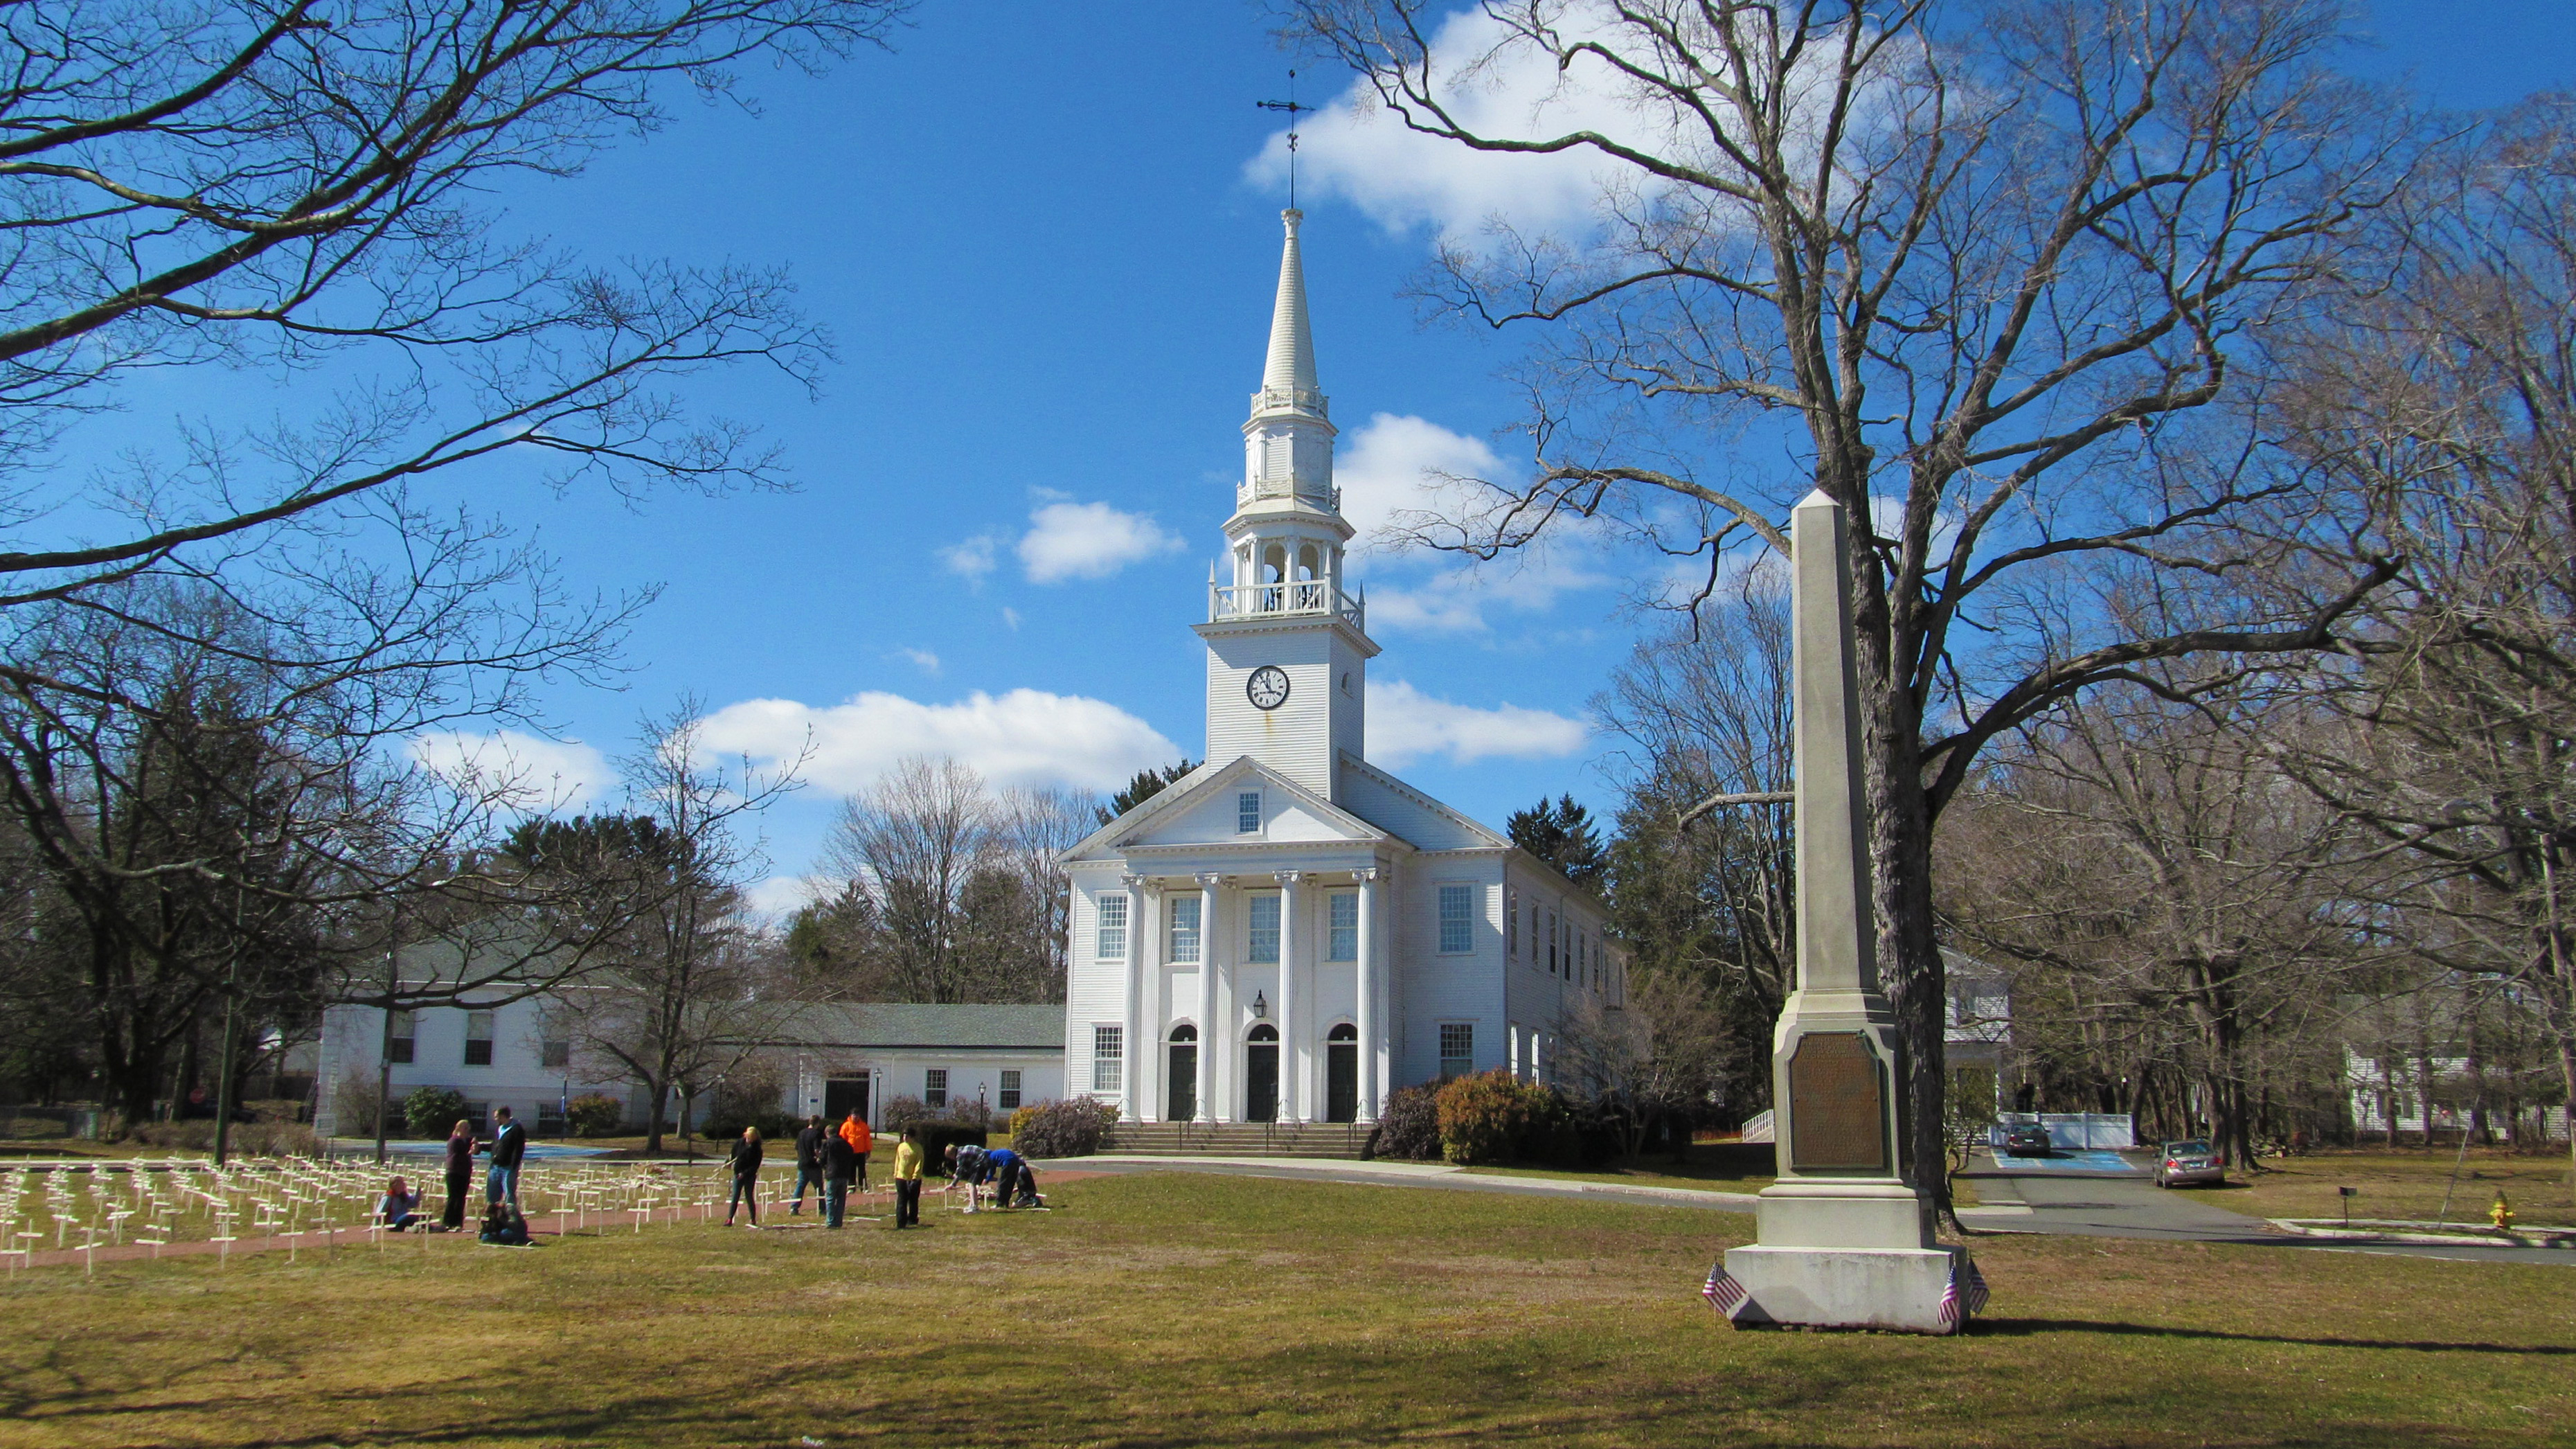 The First Congregational Church in the Cheshire Village area of Cheshire, CT